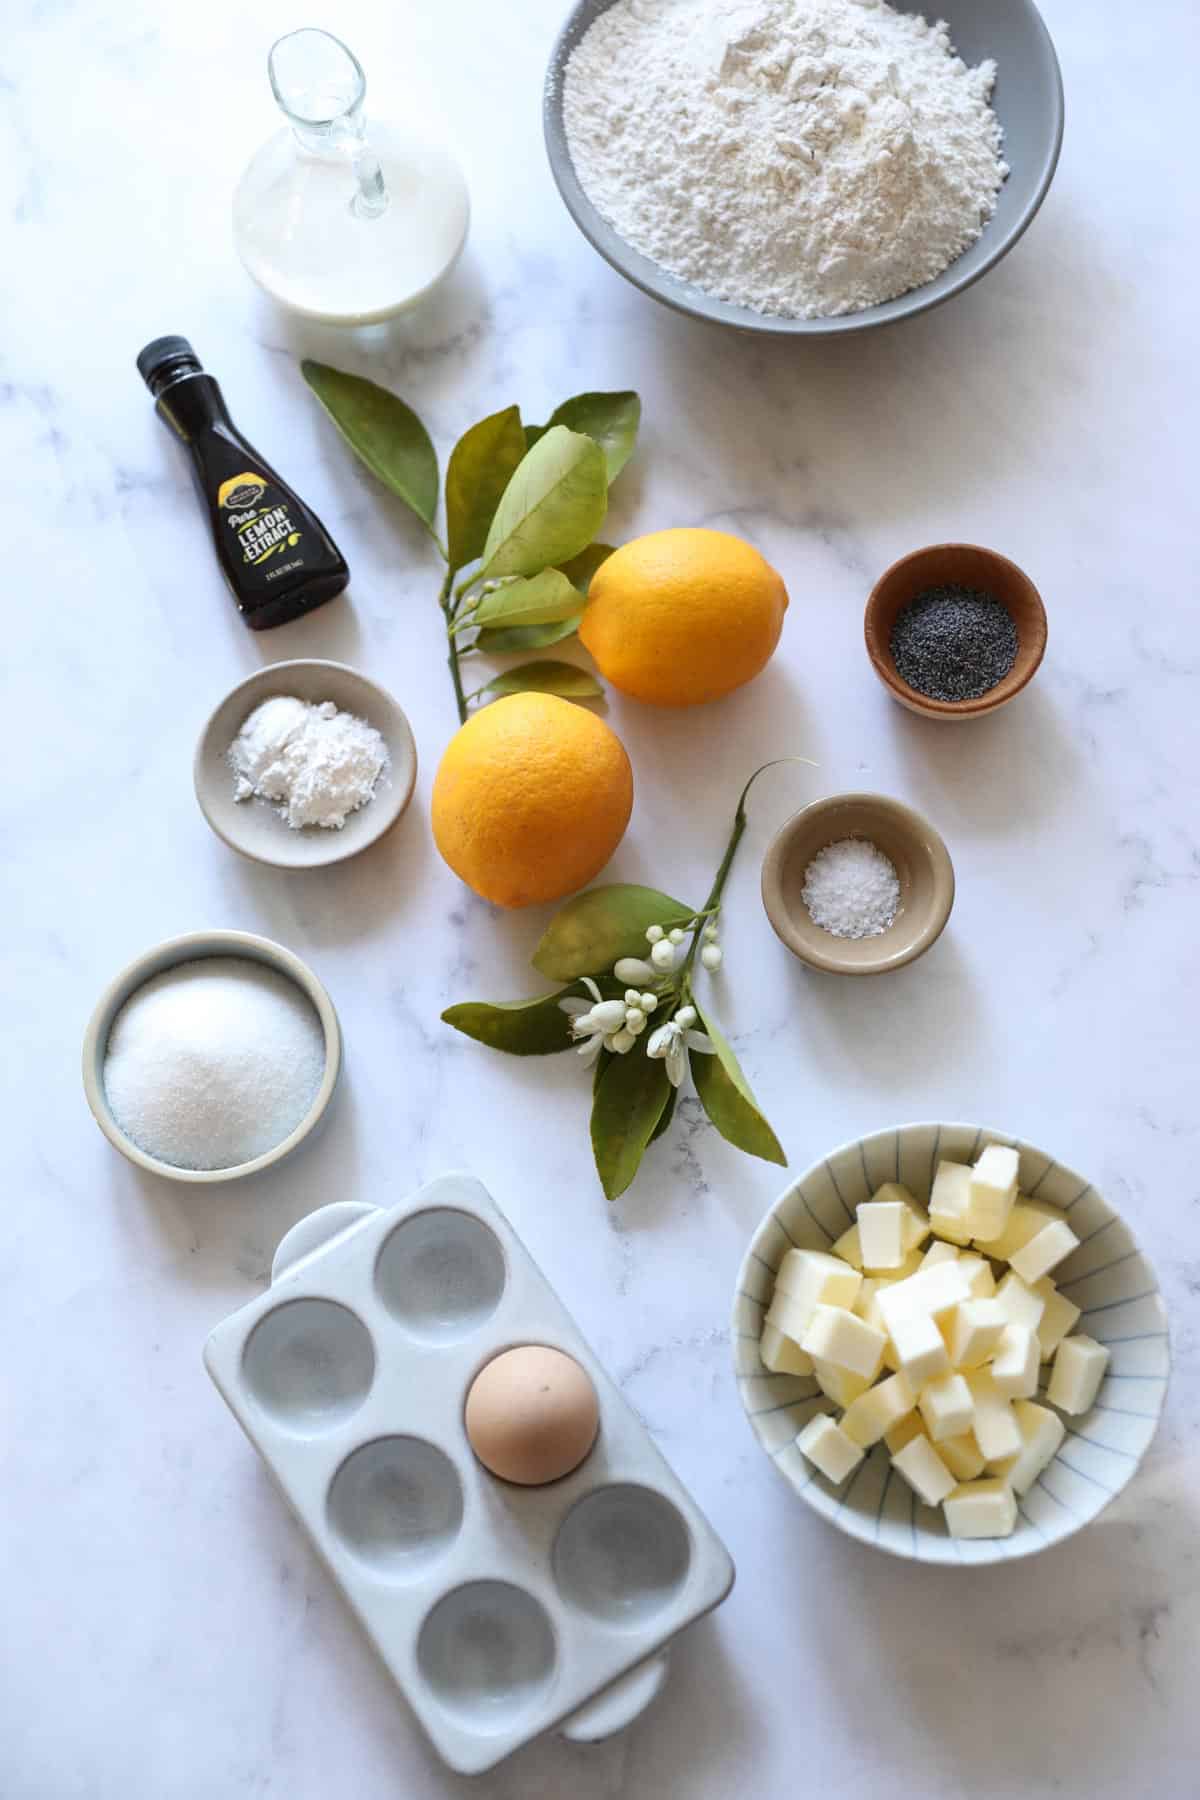 Ingredients laid out on a counter